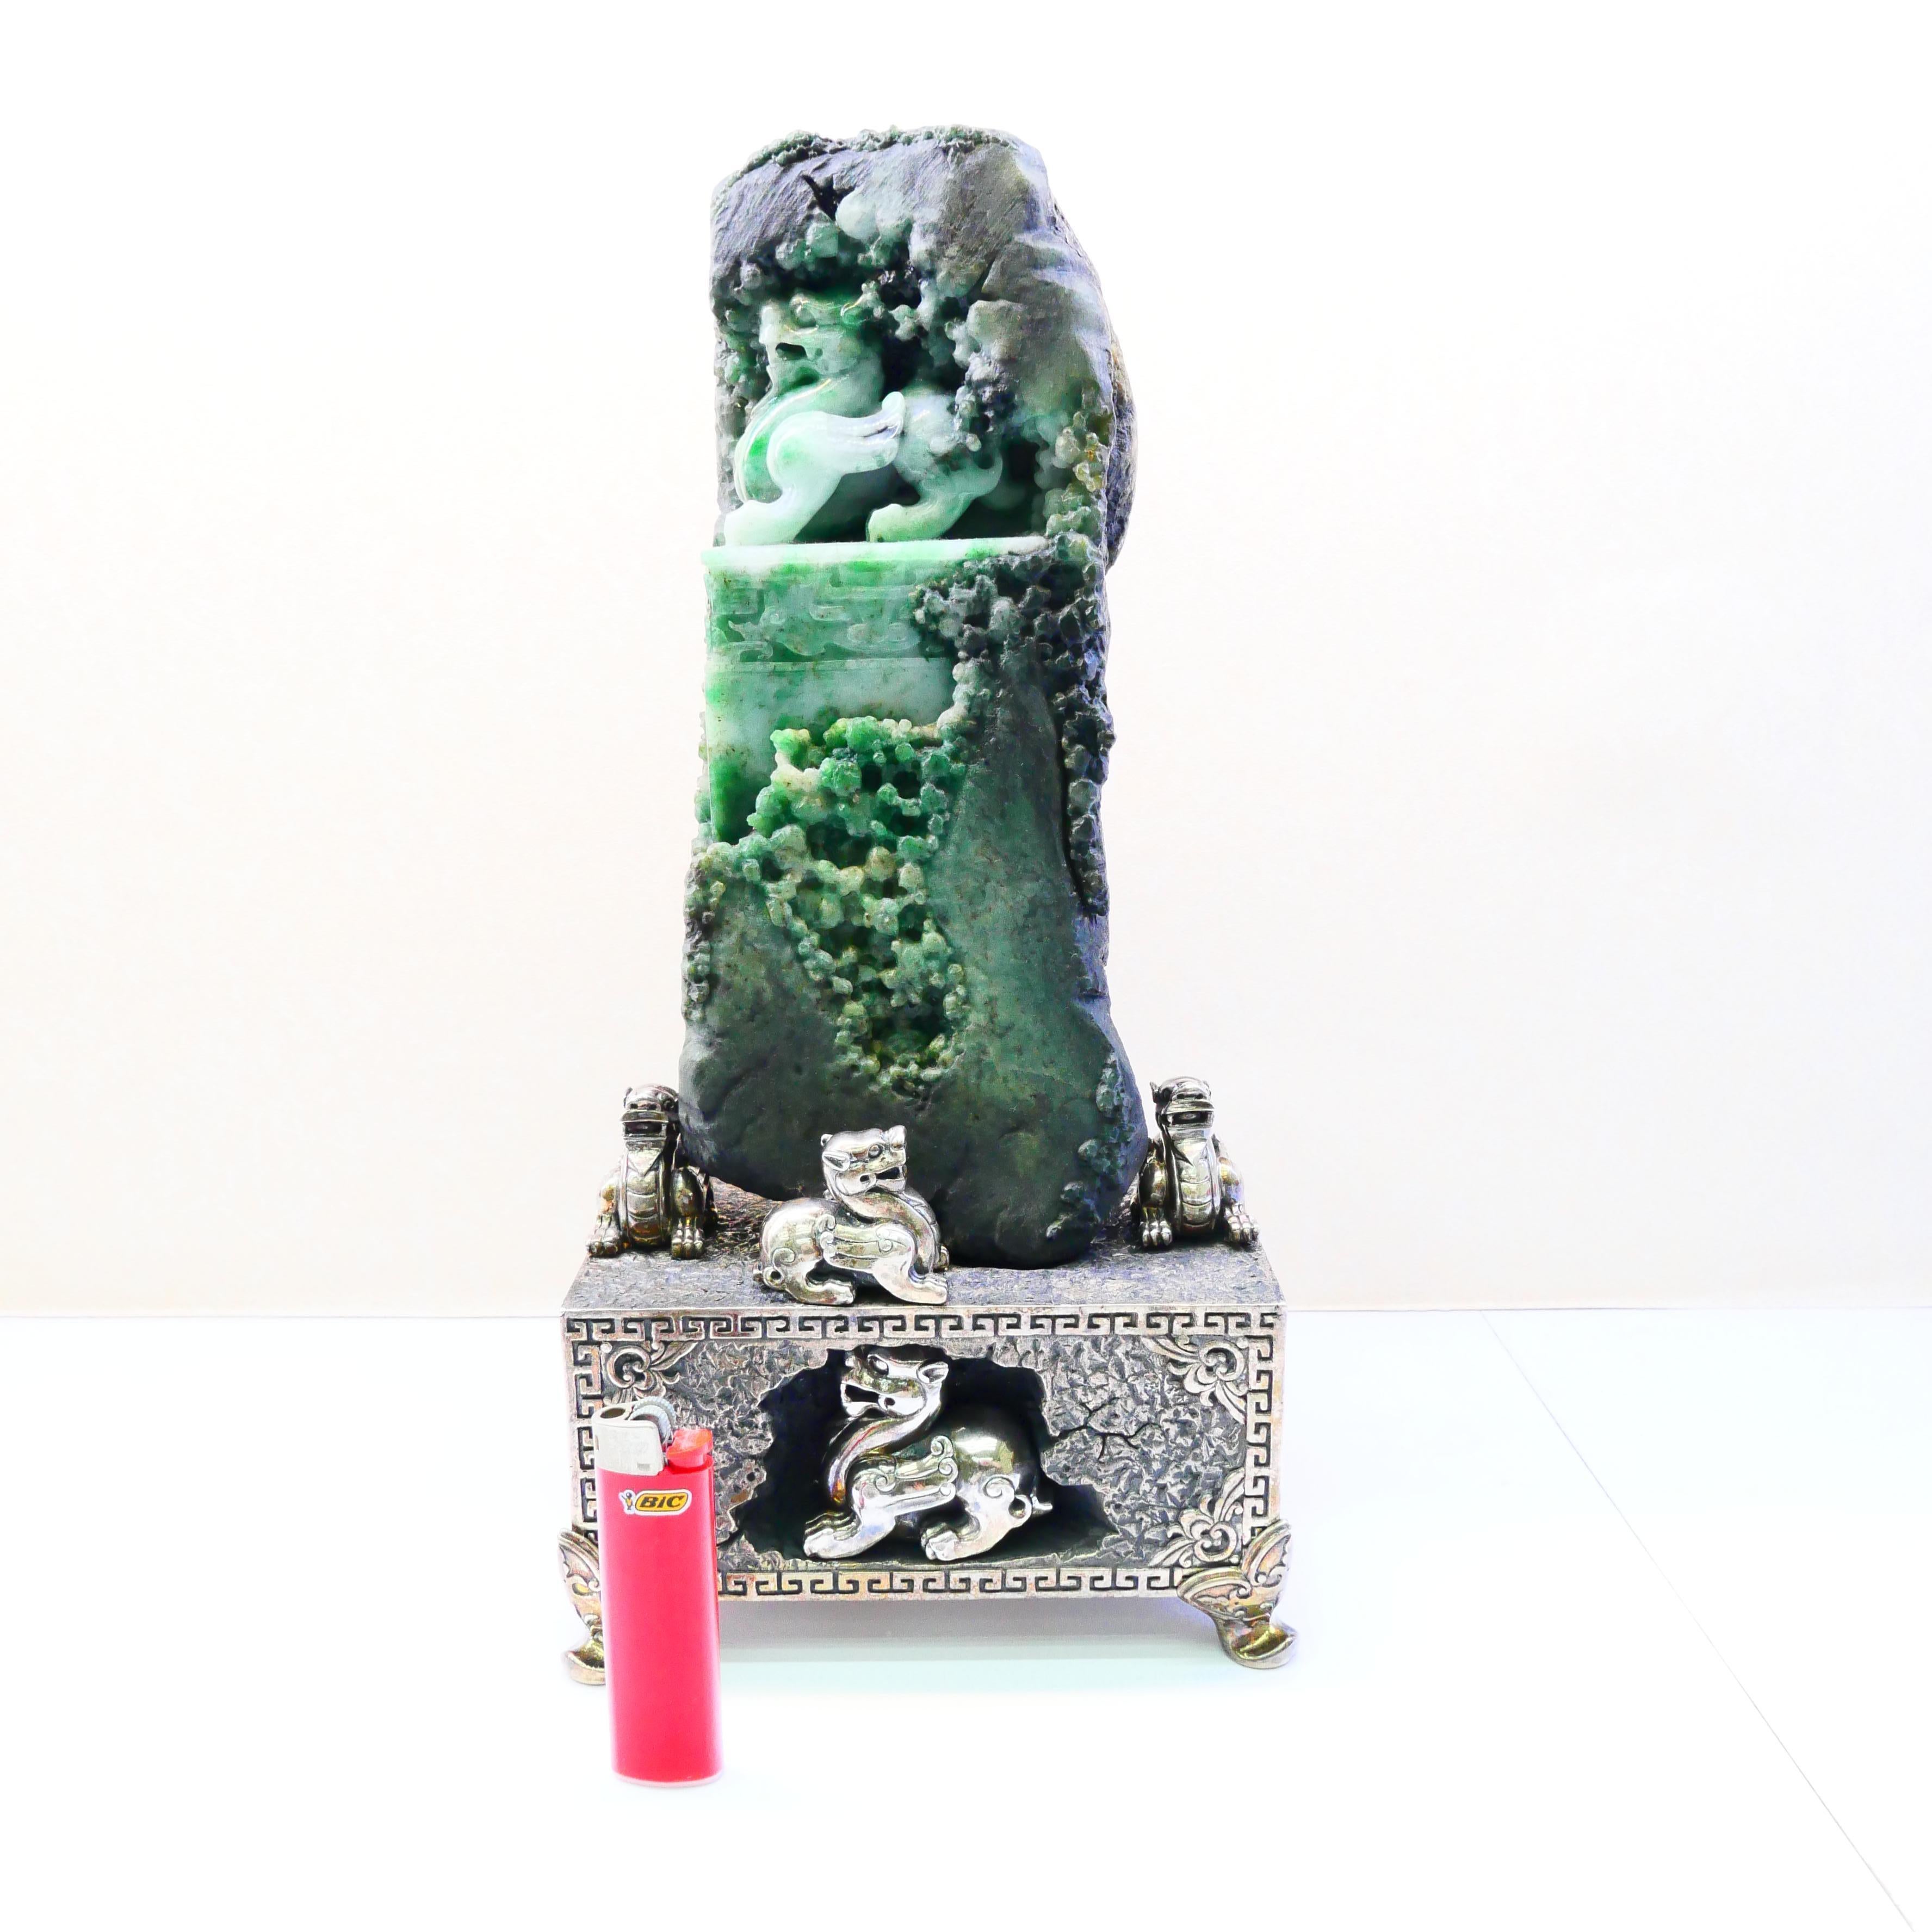 From our extensive Jade collection, here is one that will knock your socks off! First, it has age. This jade piece is certified and was carved in the Qing dynasty 1644-1911. At some point in the 1970's it was touched up with a light polish. We have